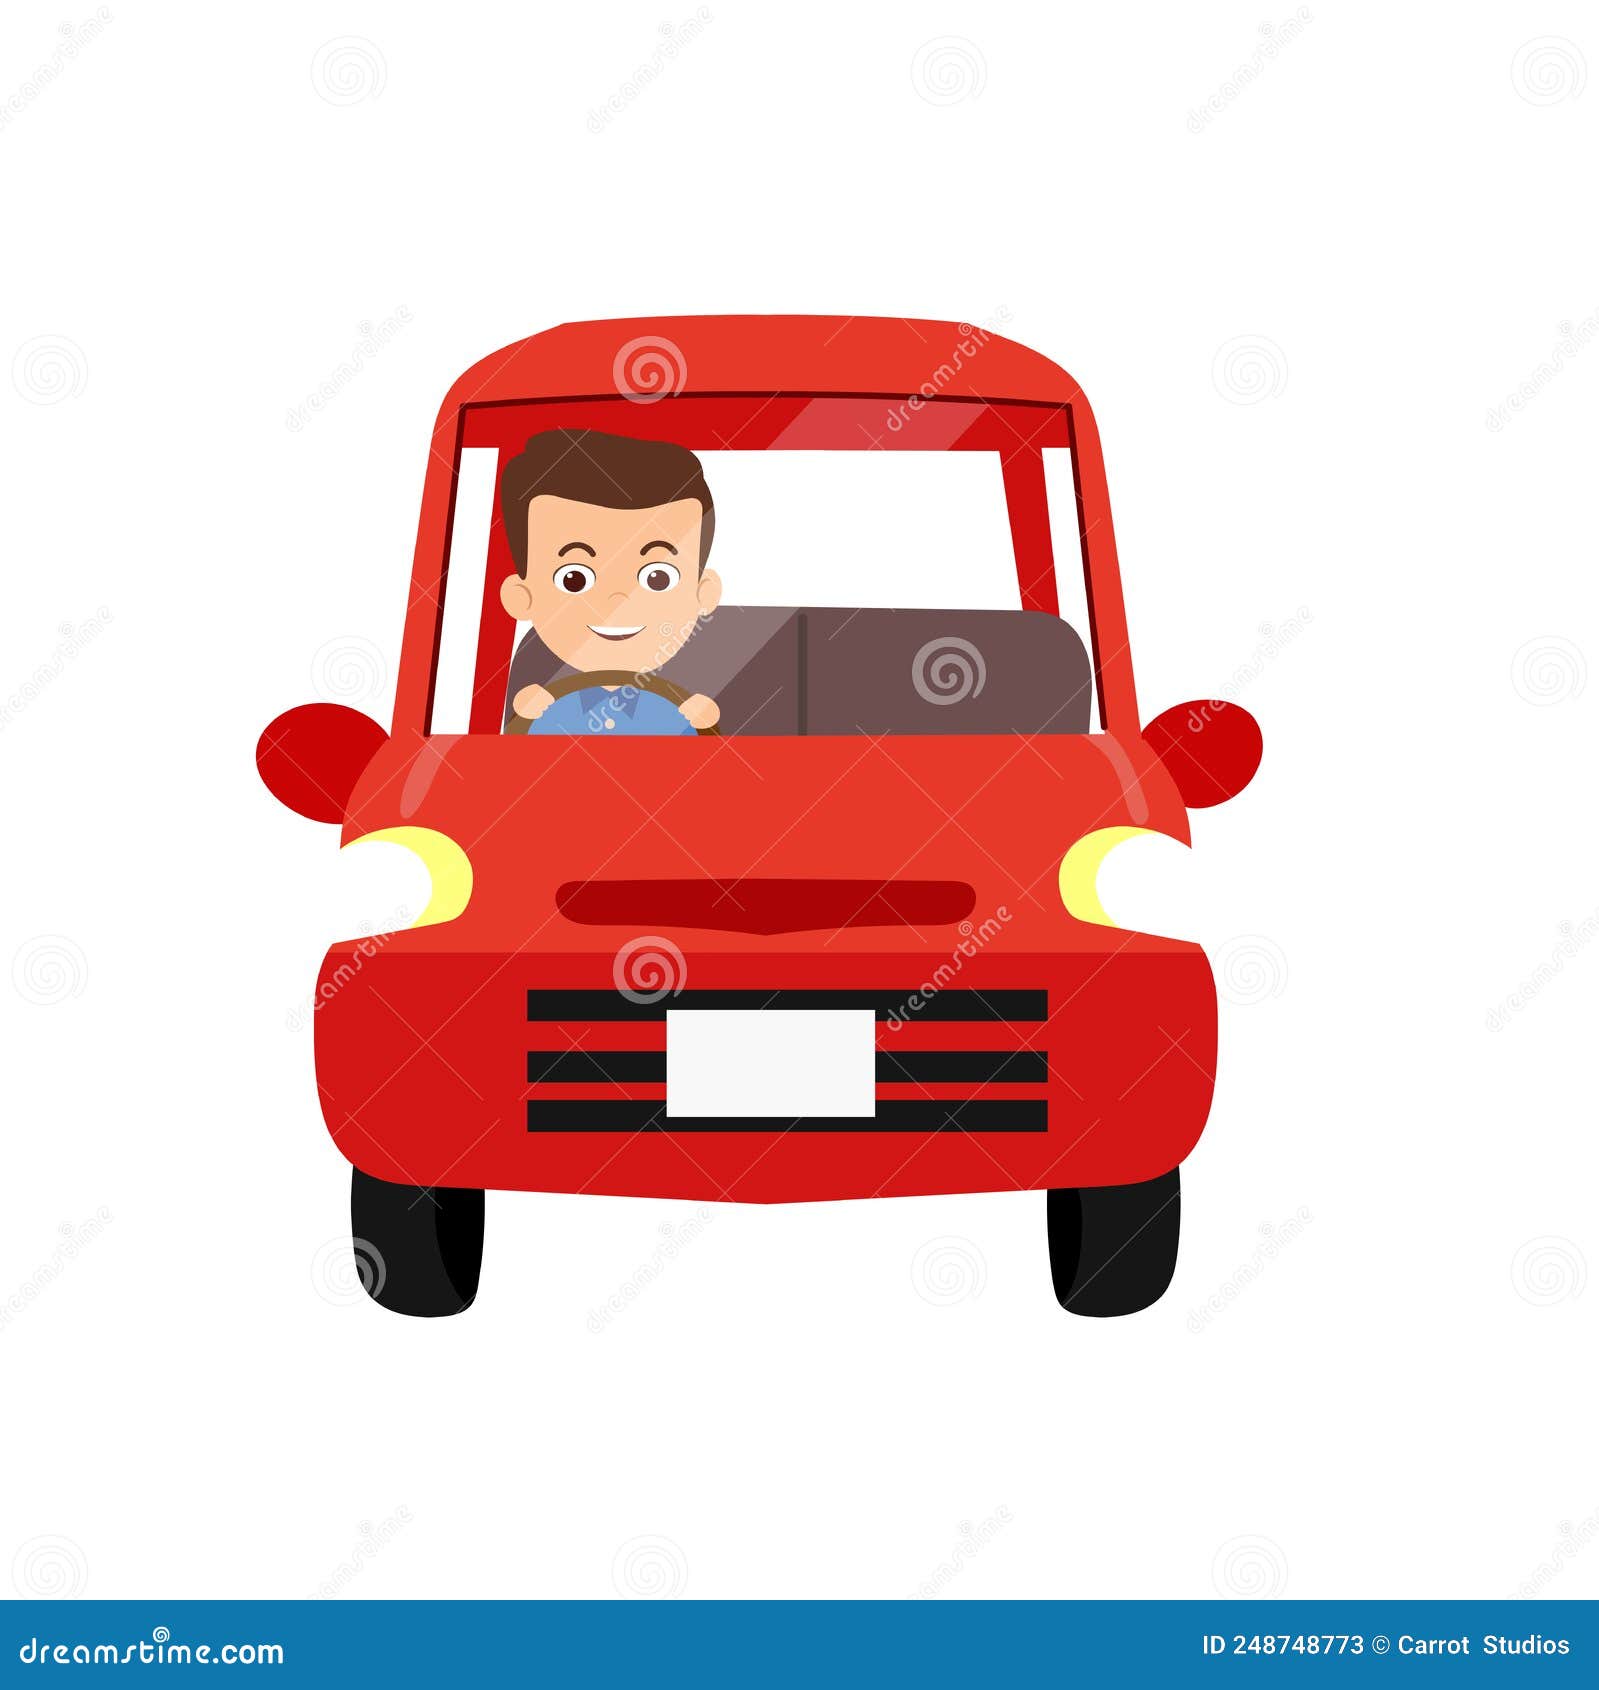 Man driving car clipart stock vector. Illustration of young - 248748773